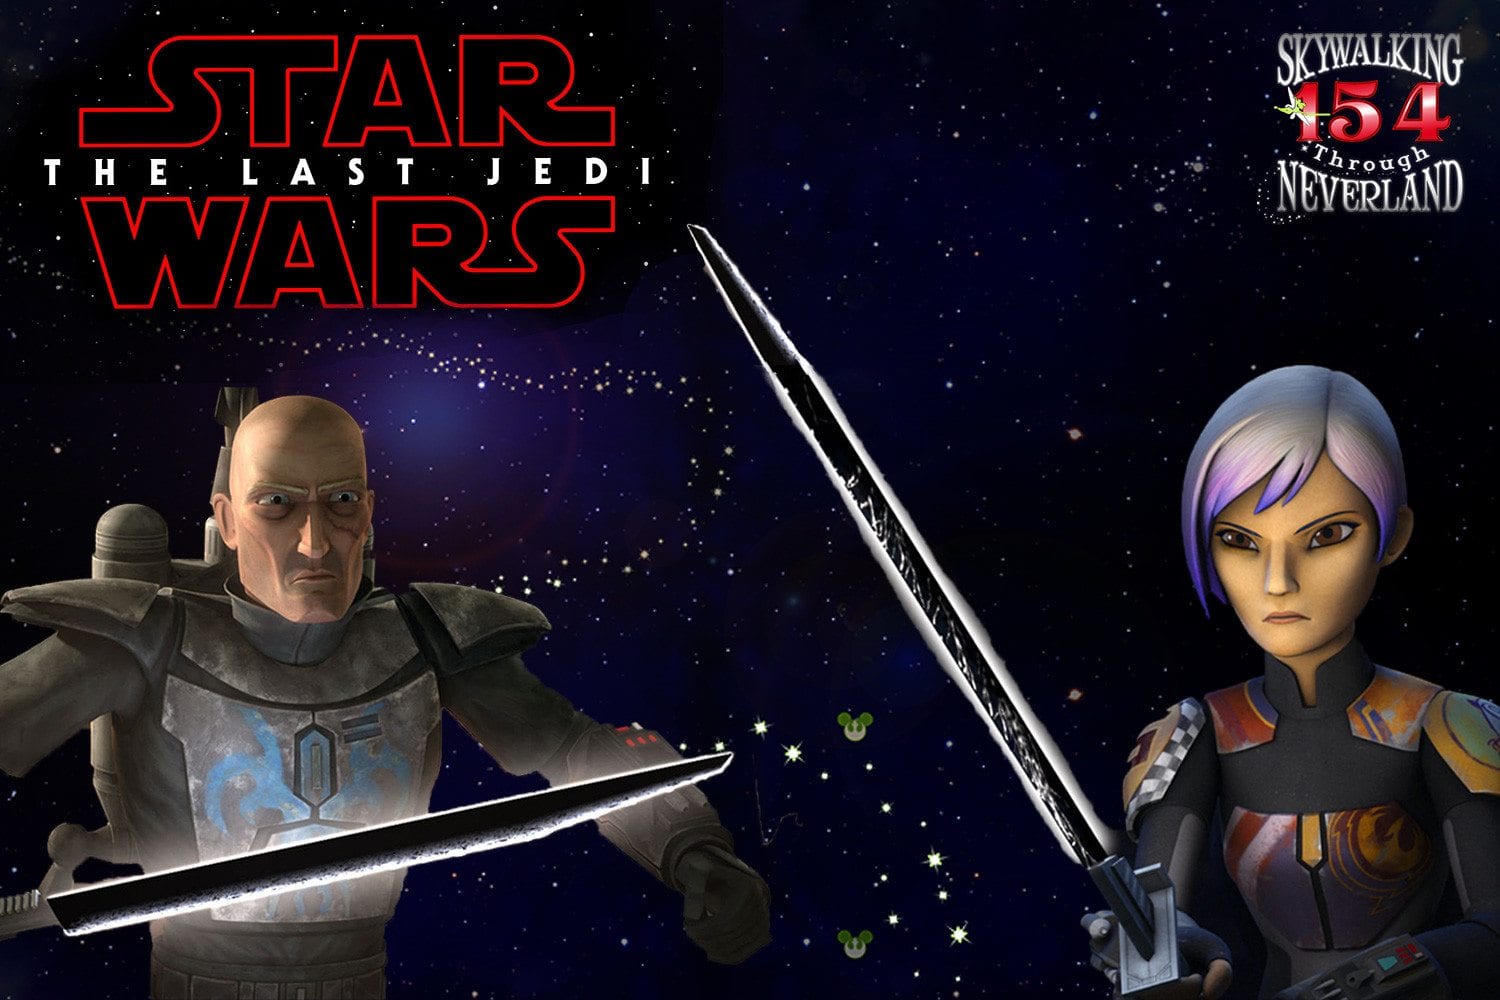 Star Wars Rebels "Trials of the Darksaber" gave us the or...